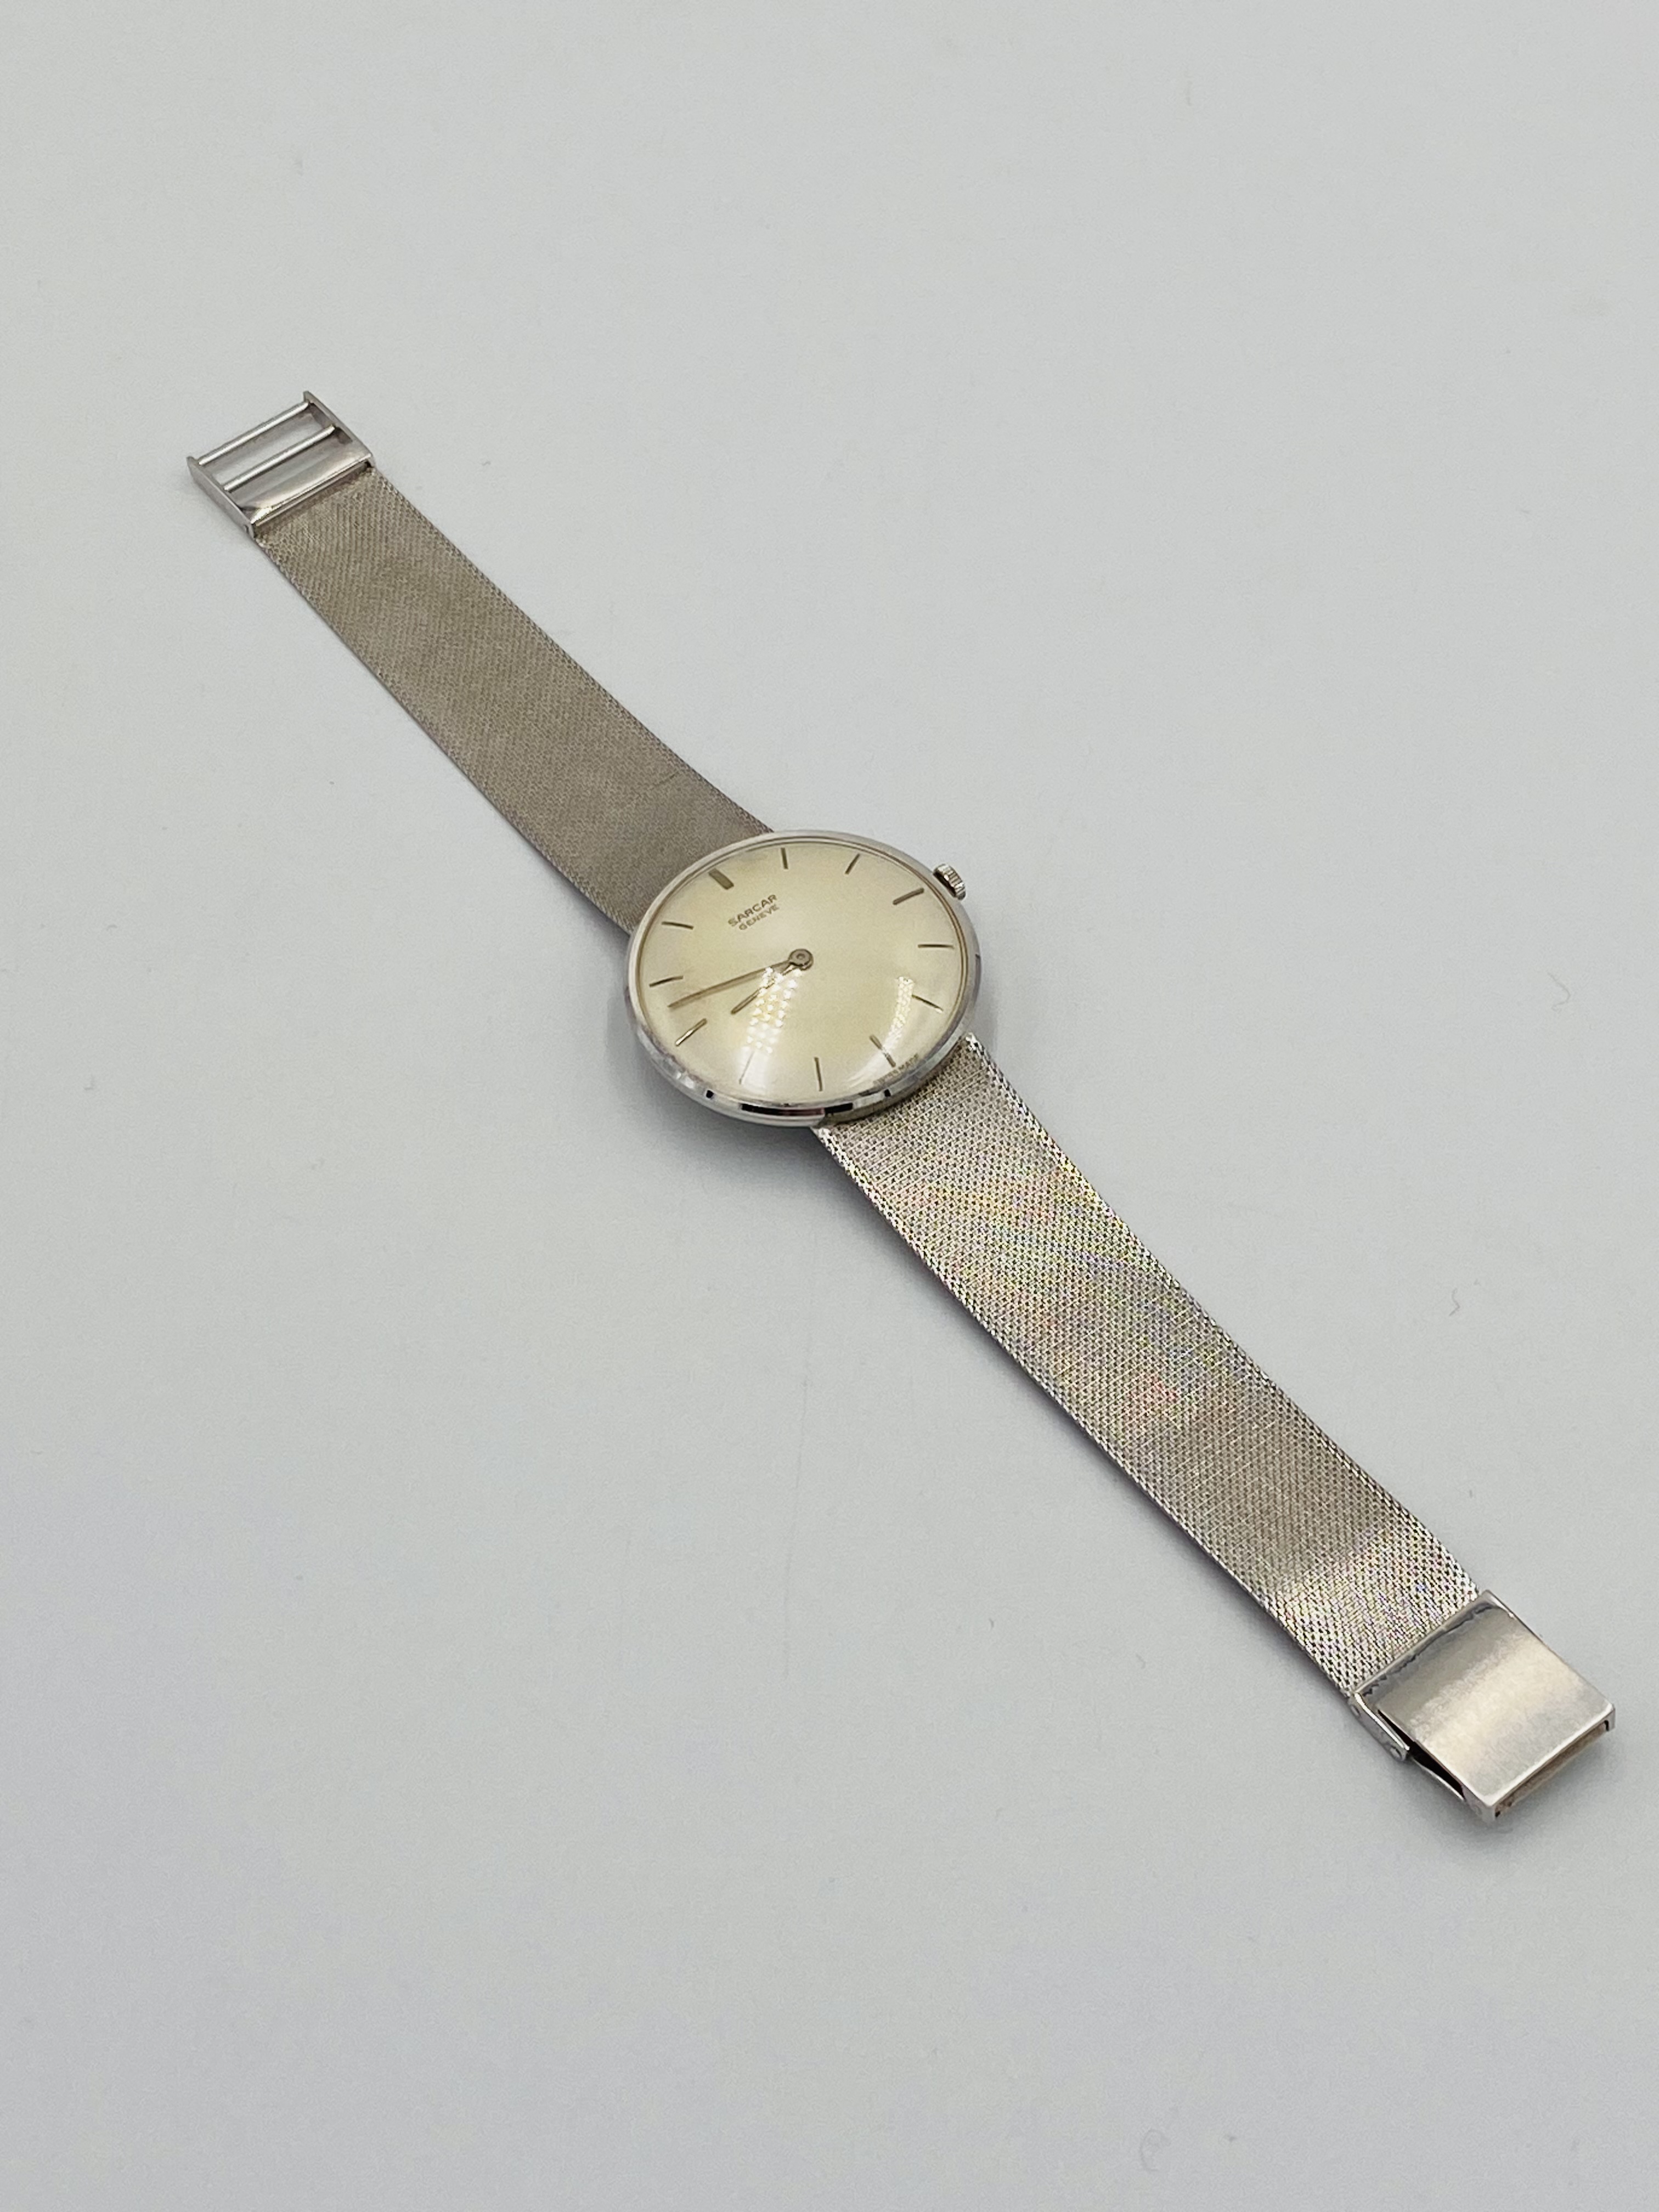 Sarcar Geneve wristwatch with 18ct gold strap - Image 4 of 7